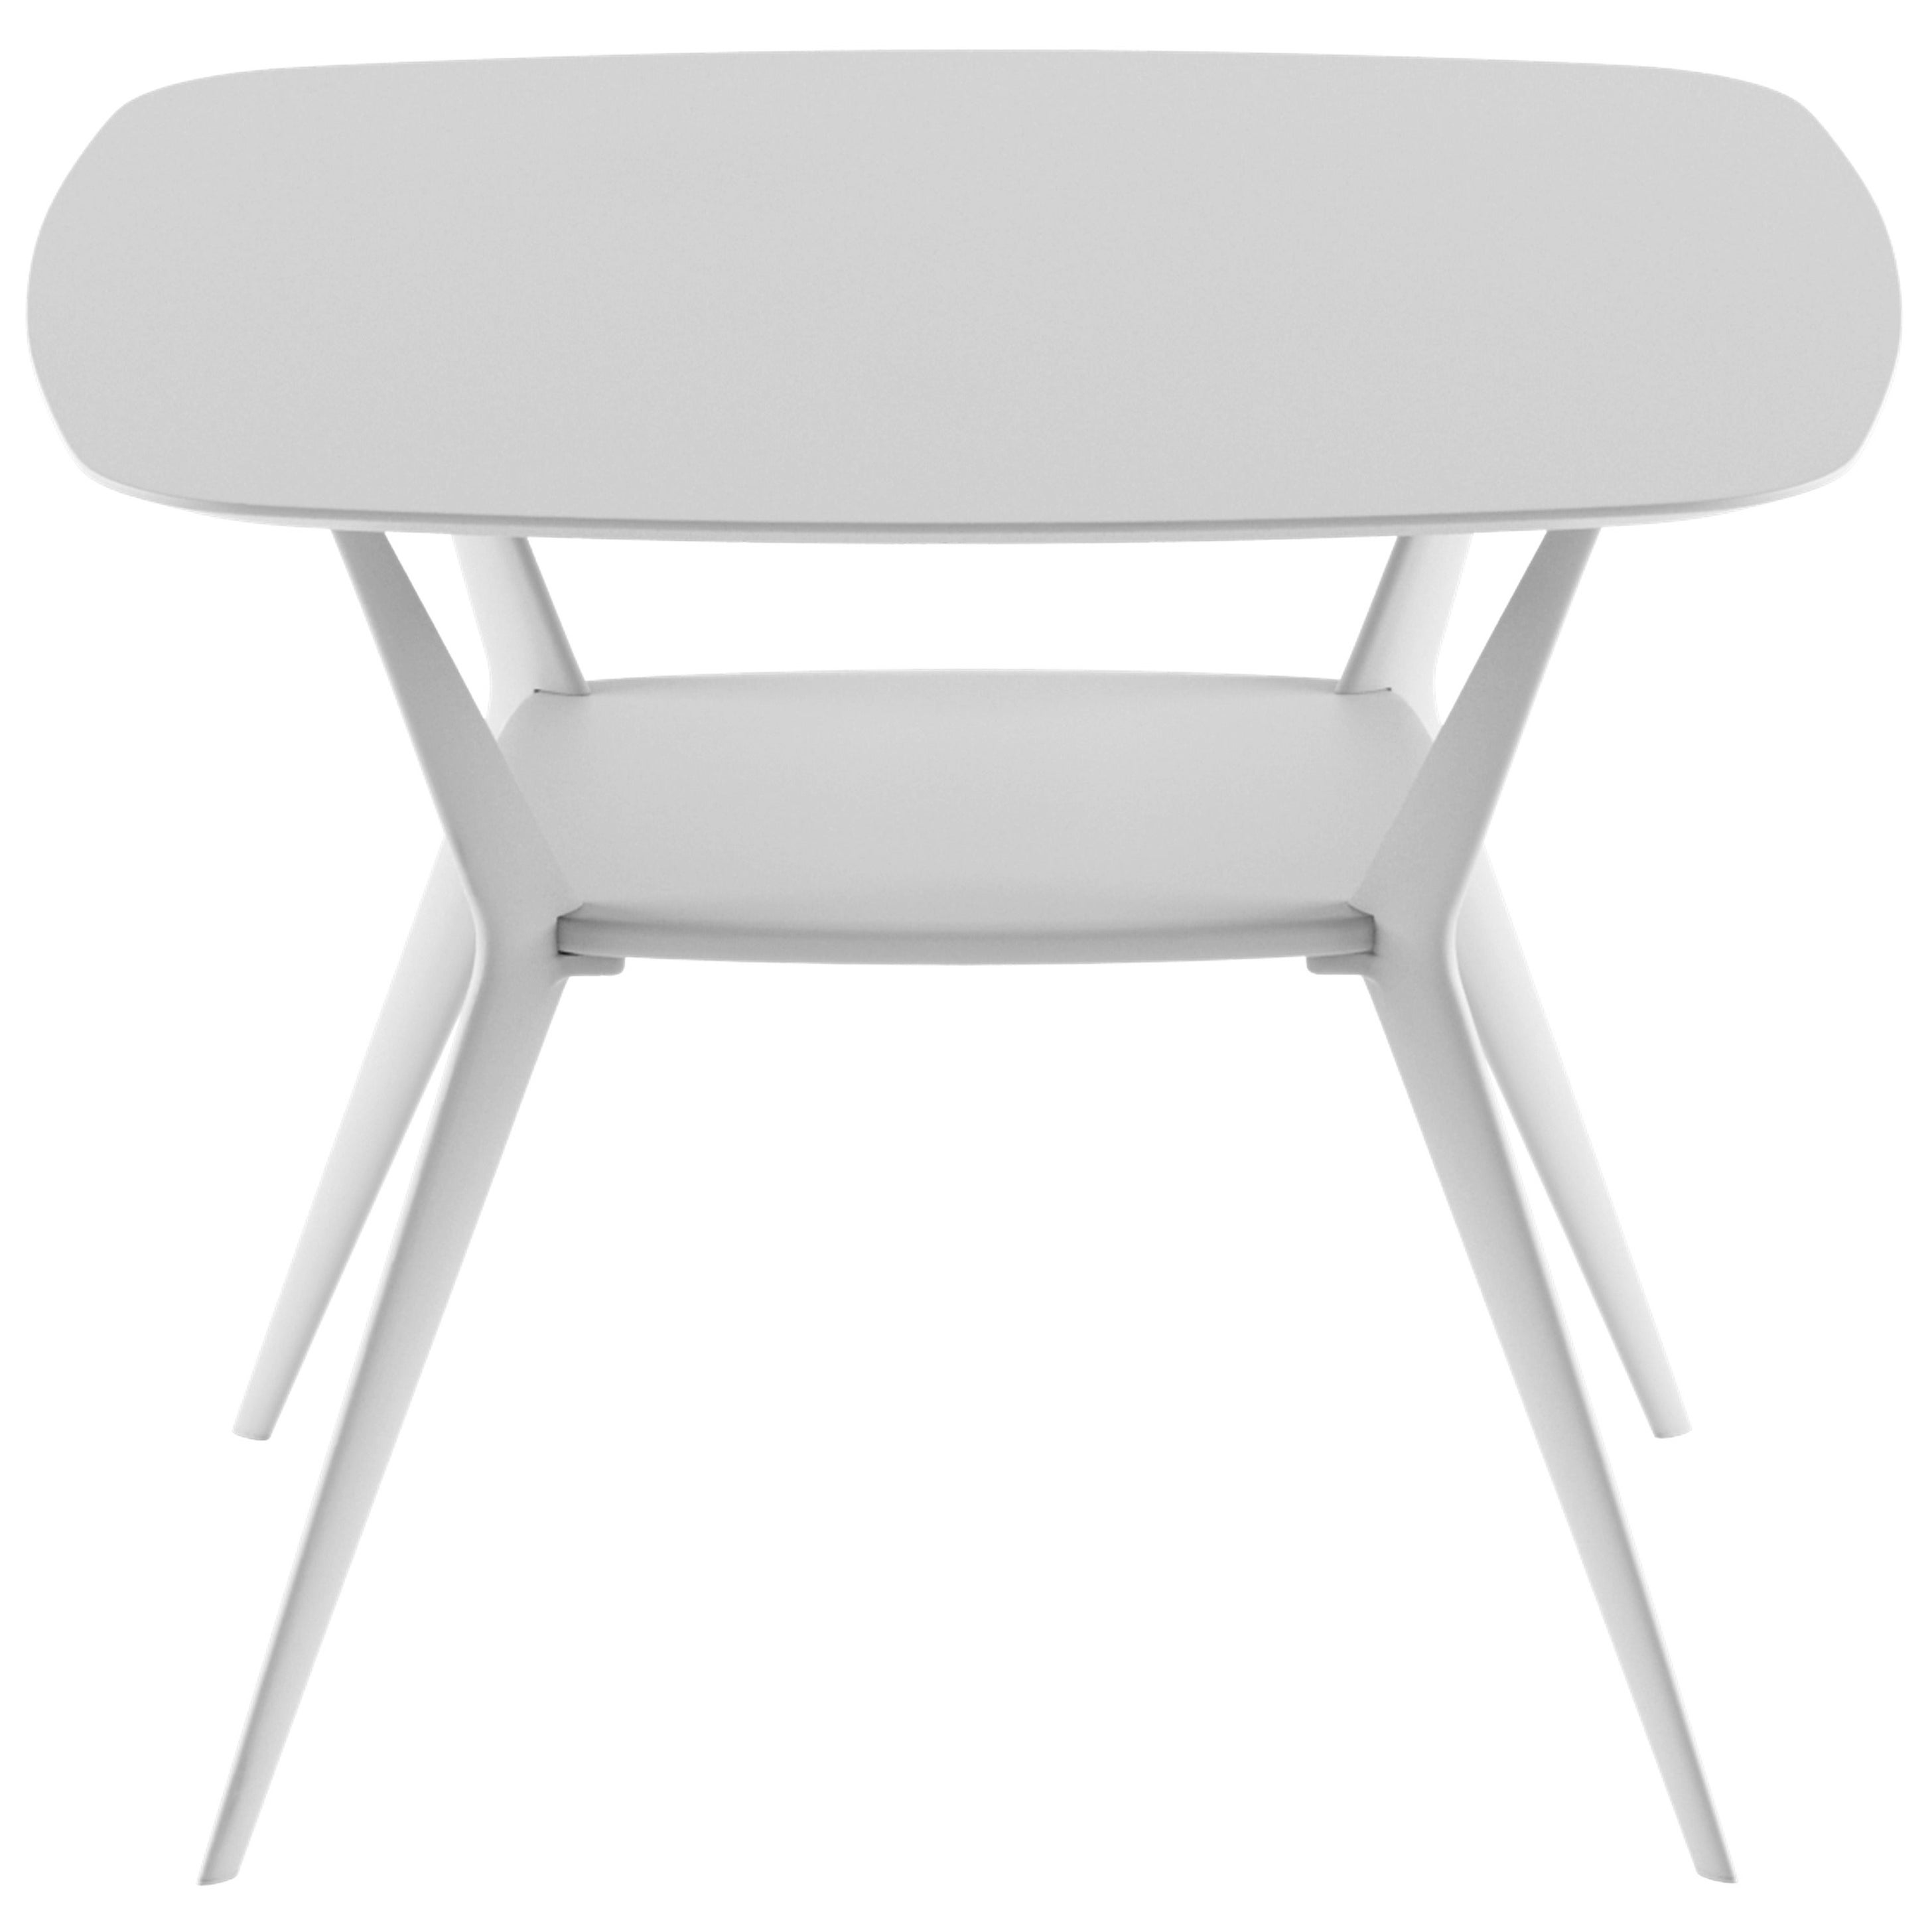 Alias B02 Biplane XS 60x60 Outdoor Table in White Top and Lacquered Frame For Sale